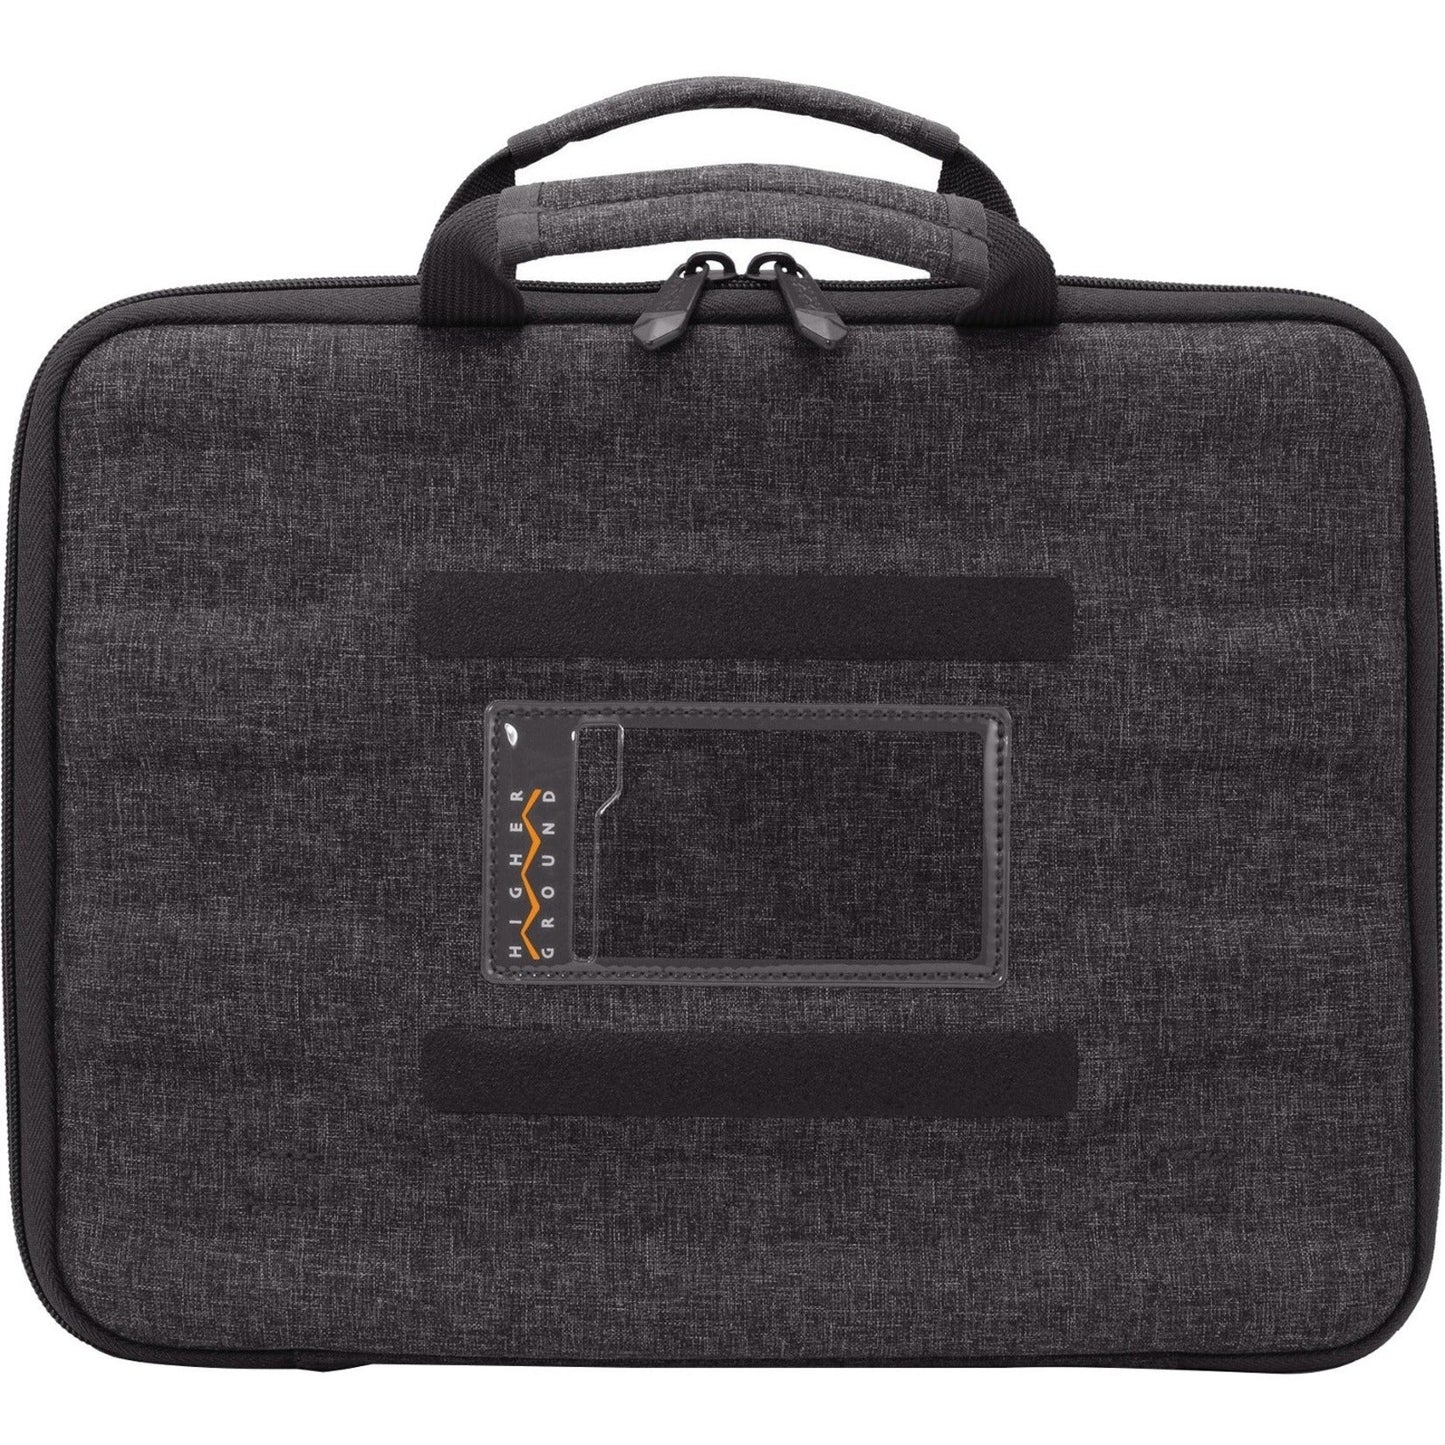 Higher Ground Shuttle 3.0 Carrying Case for 11" Apple Notebook MacBook Chromebook - Gray